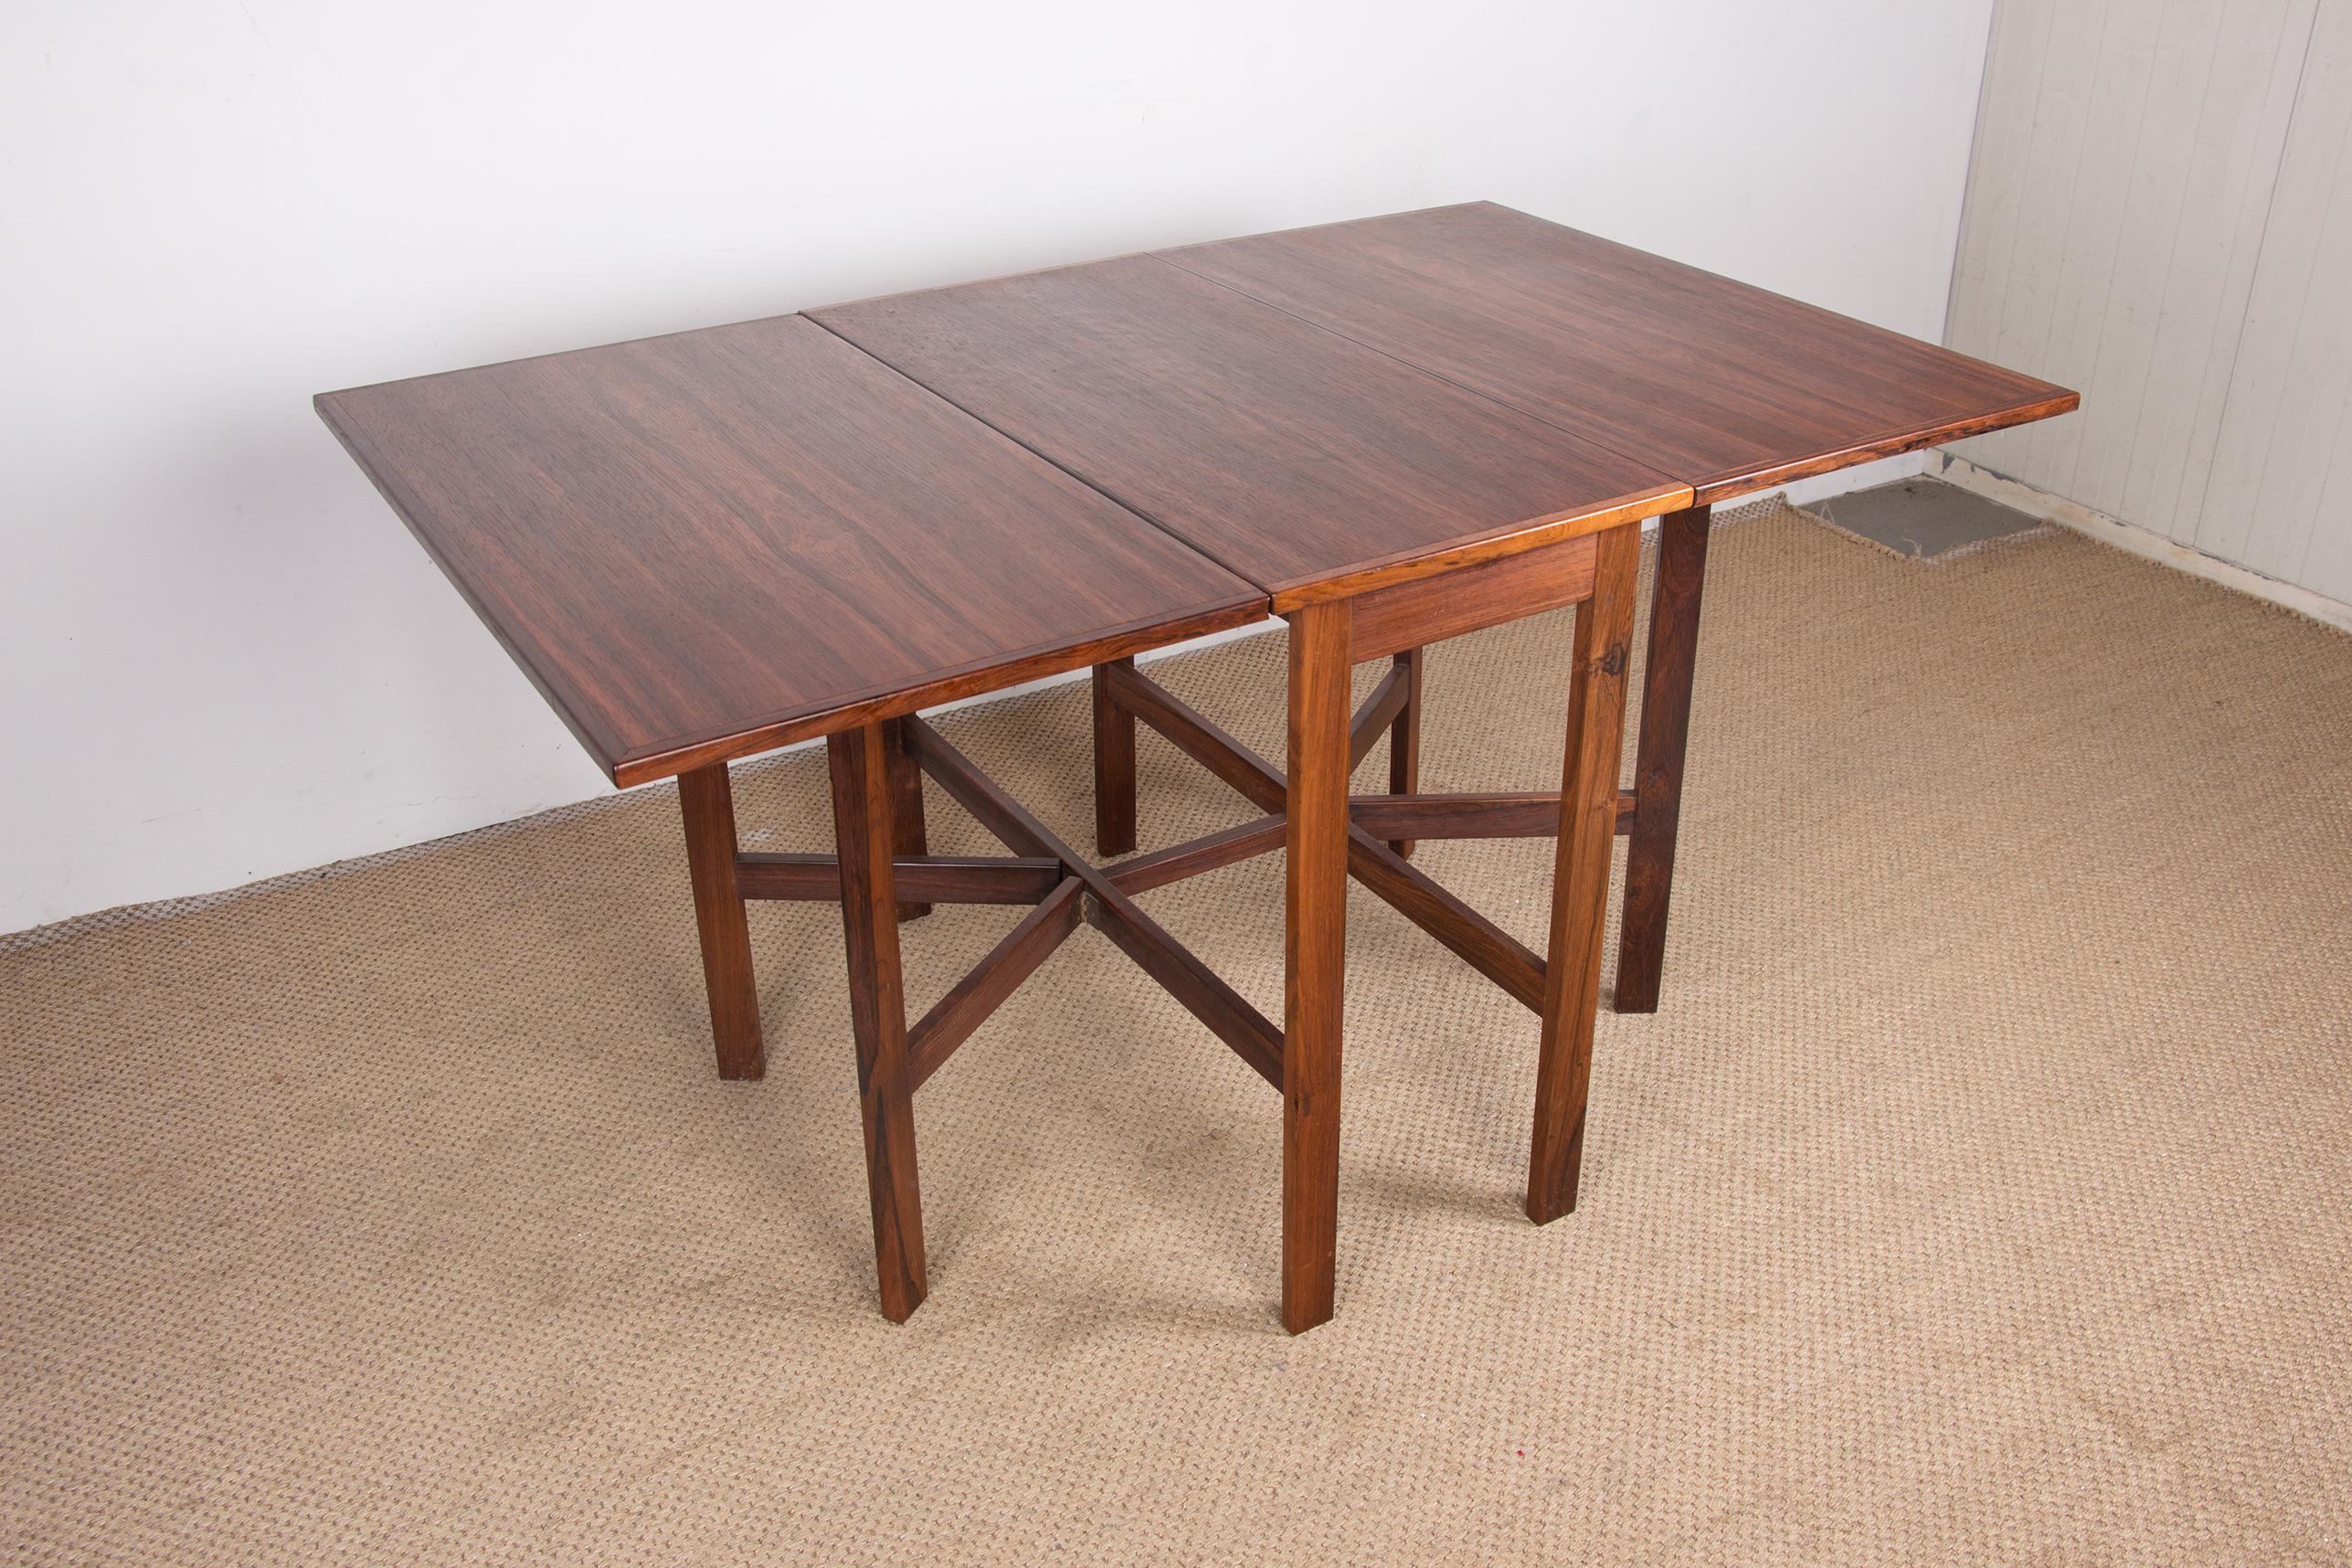 Danish Folding Table Extendable in Rosewood, with 2 Folding Extensions, 1960 For Sale 7